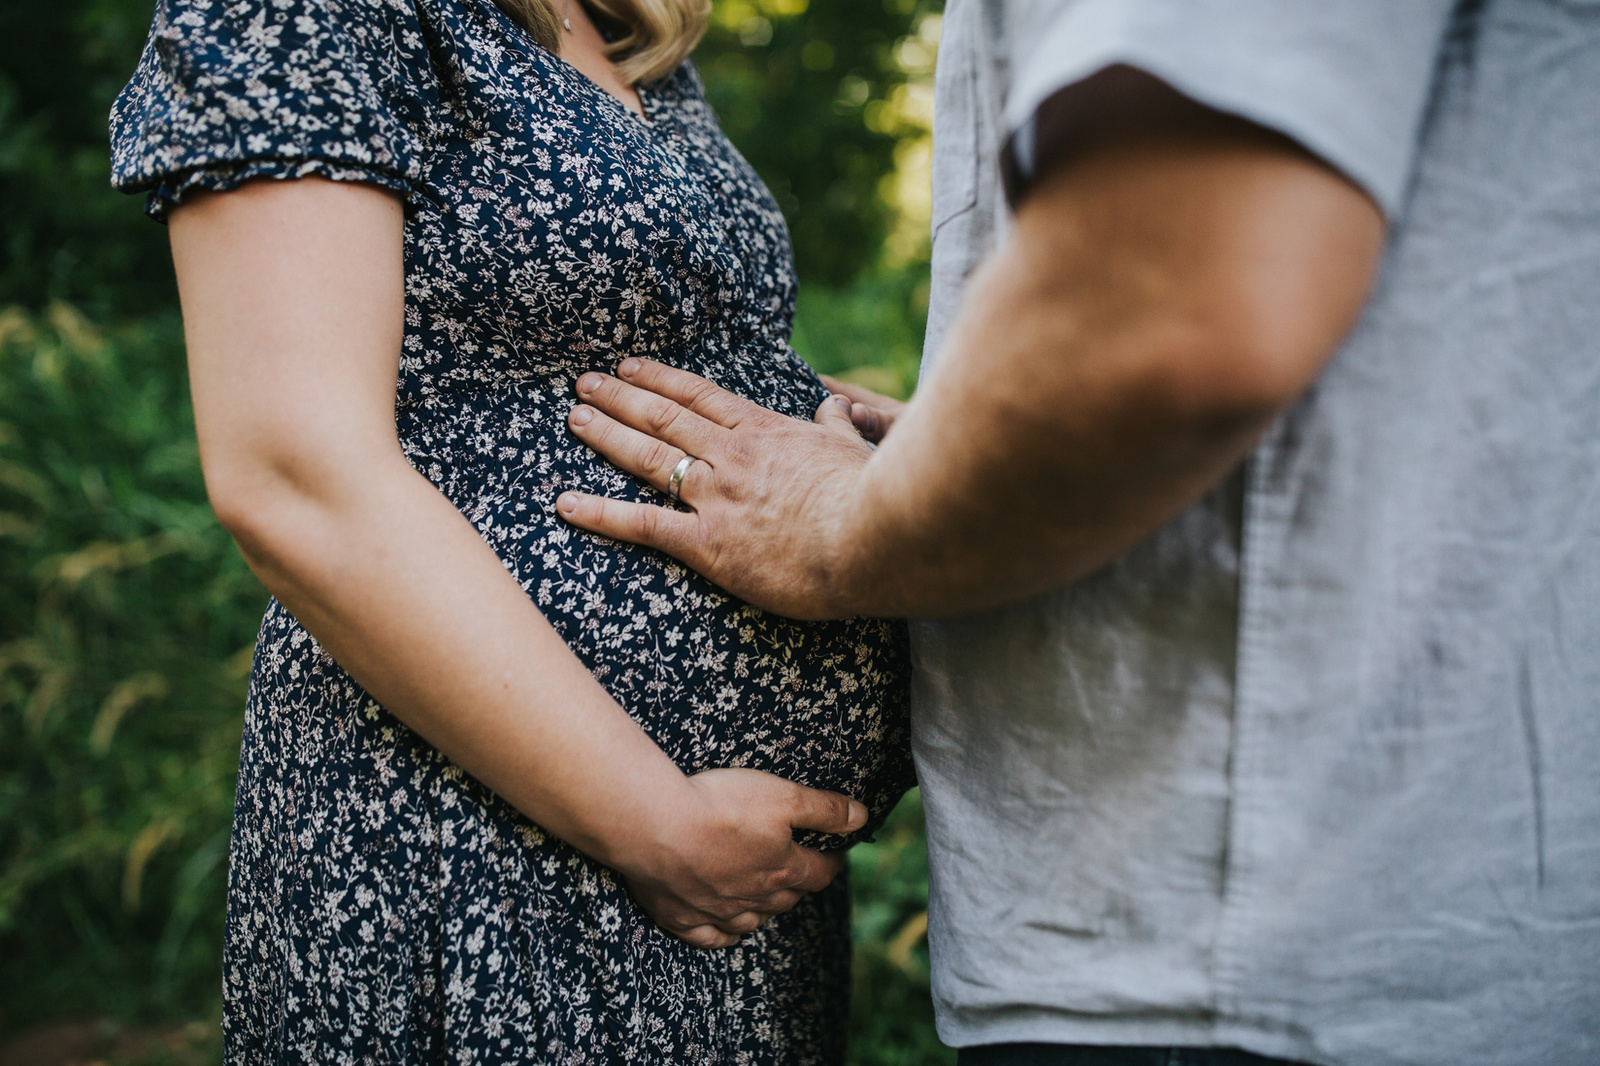 Zoom in on dad's hands touching mom's belly during a Yamhill, OR maternity session.